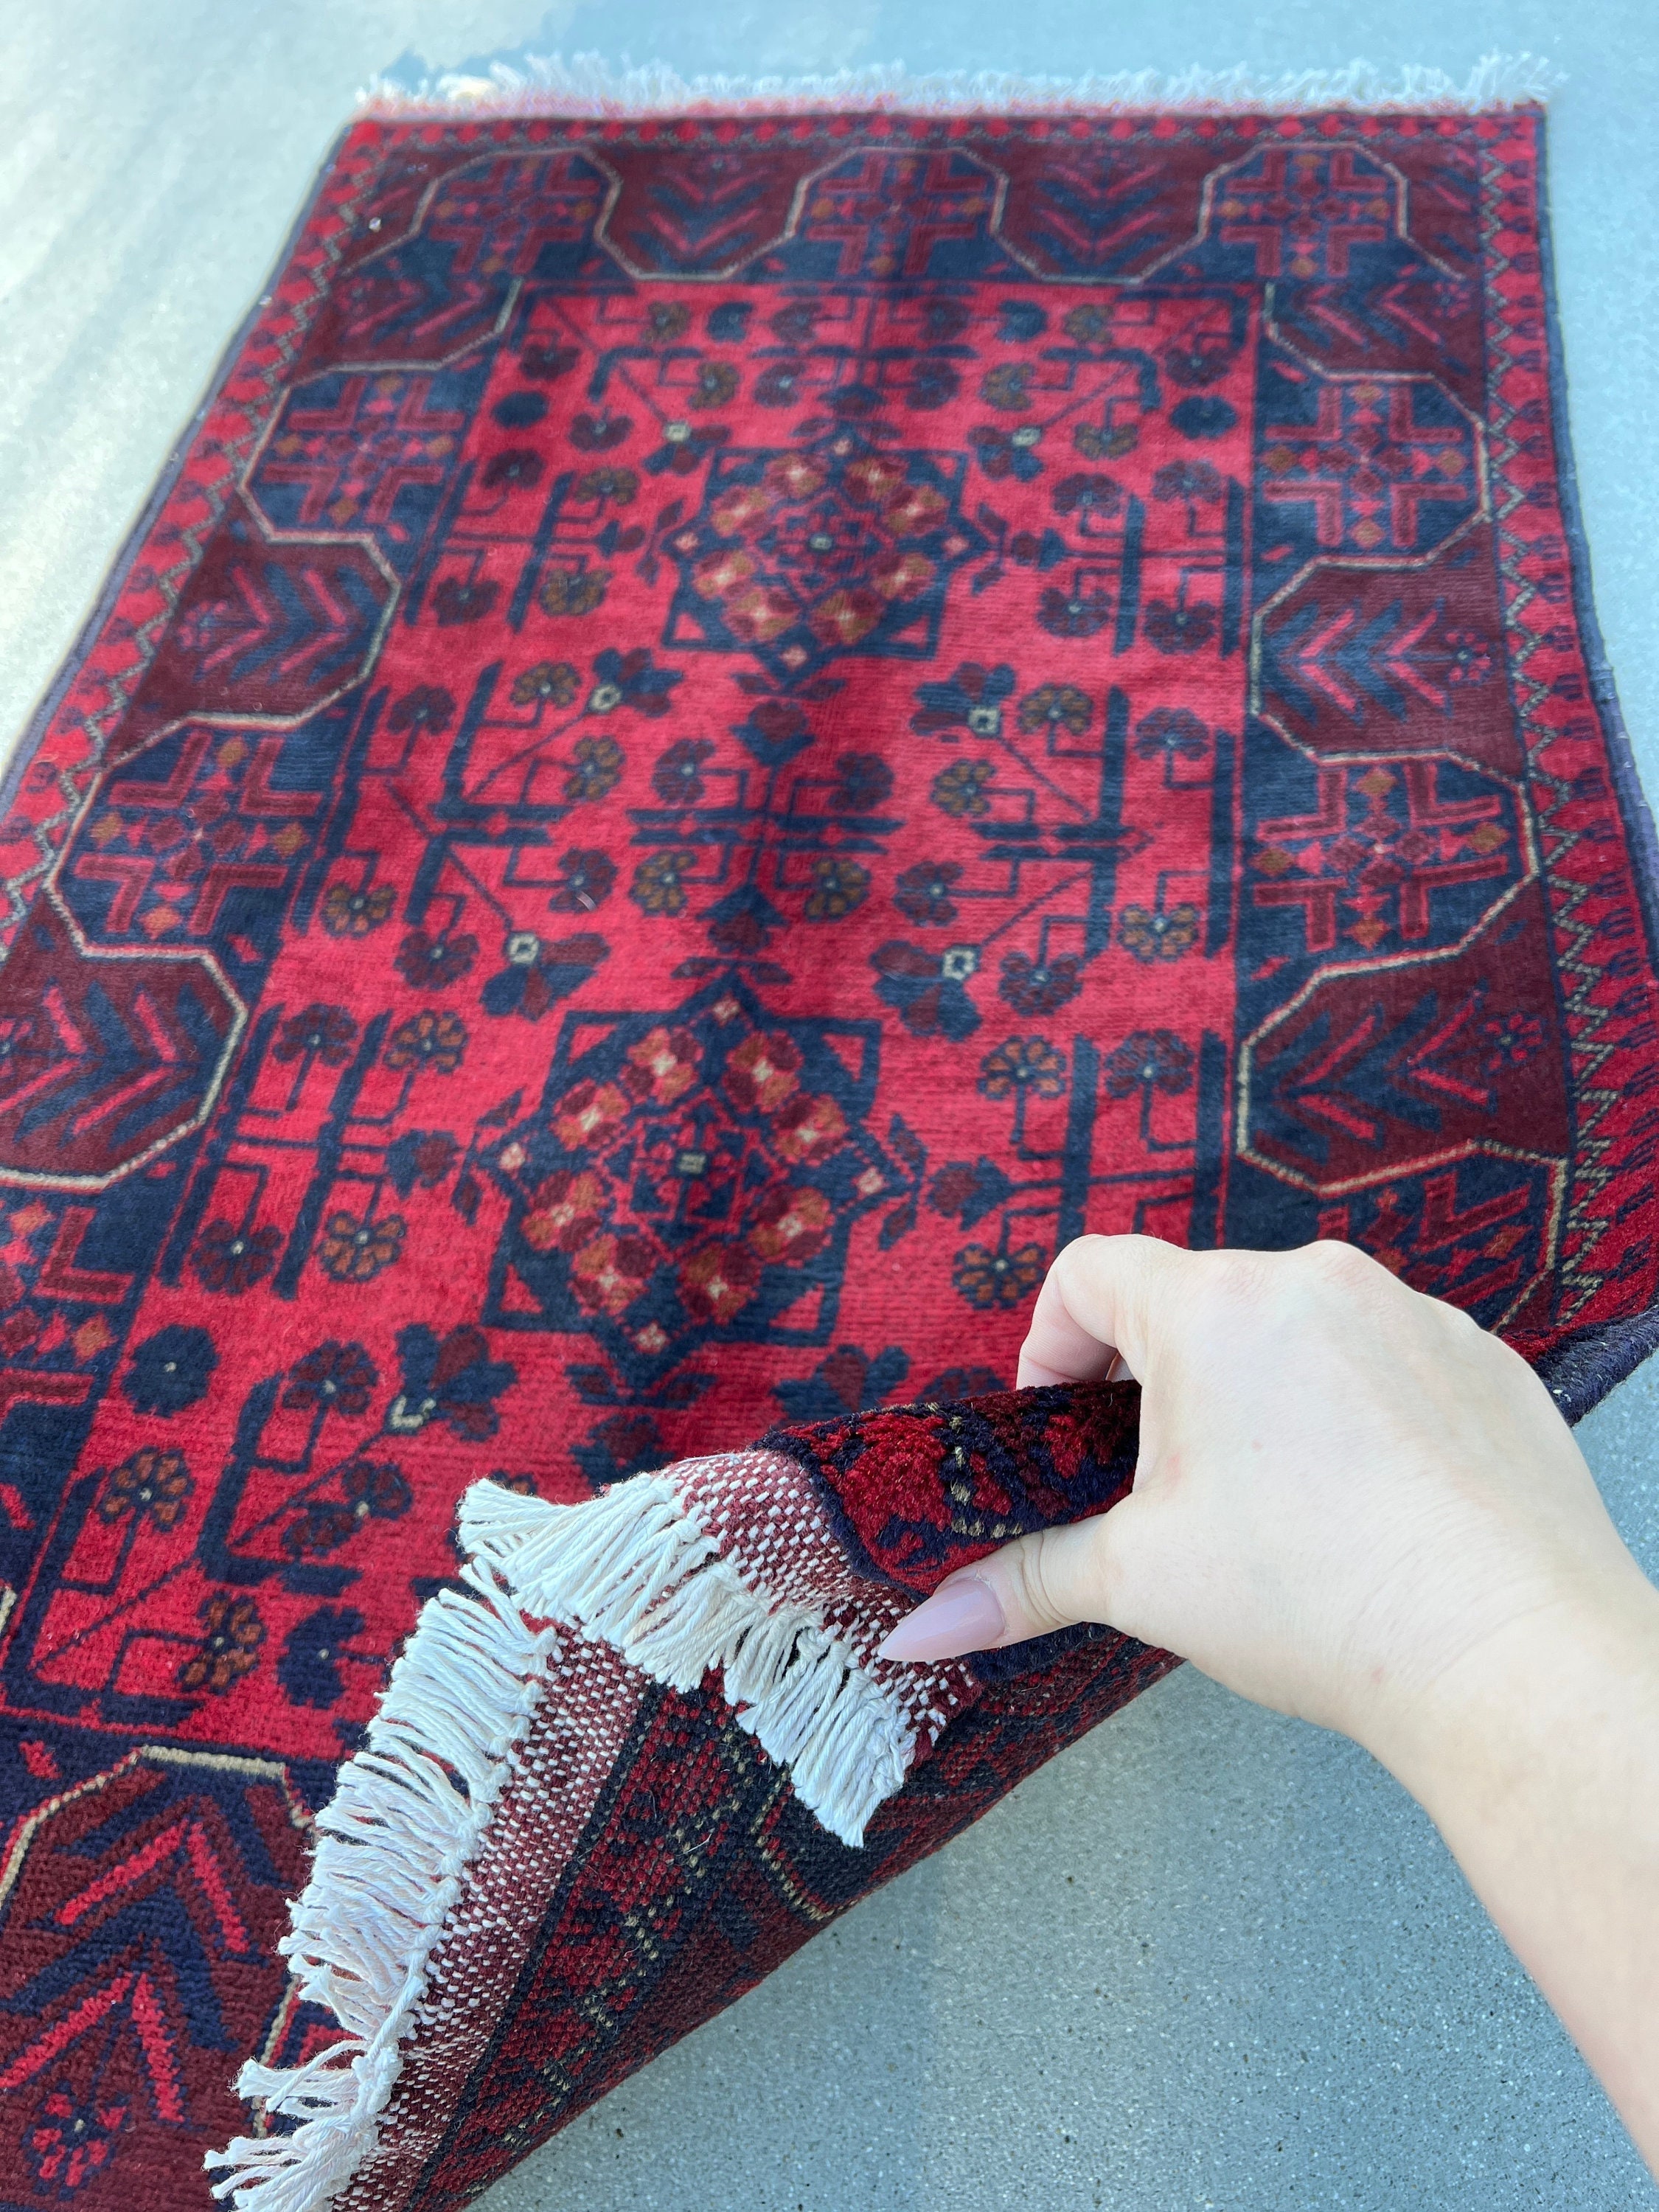 Hand Knotted Afghan Rug 2.5x4.5 Ft Auction